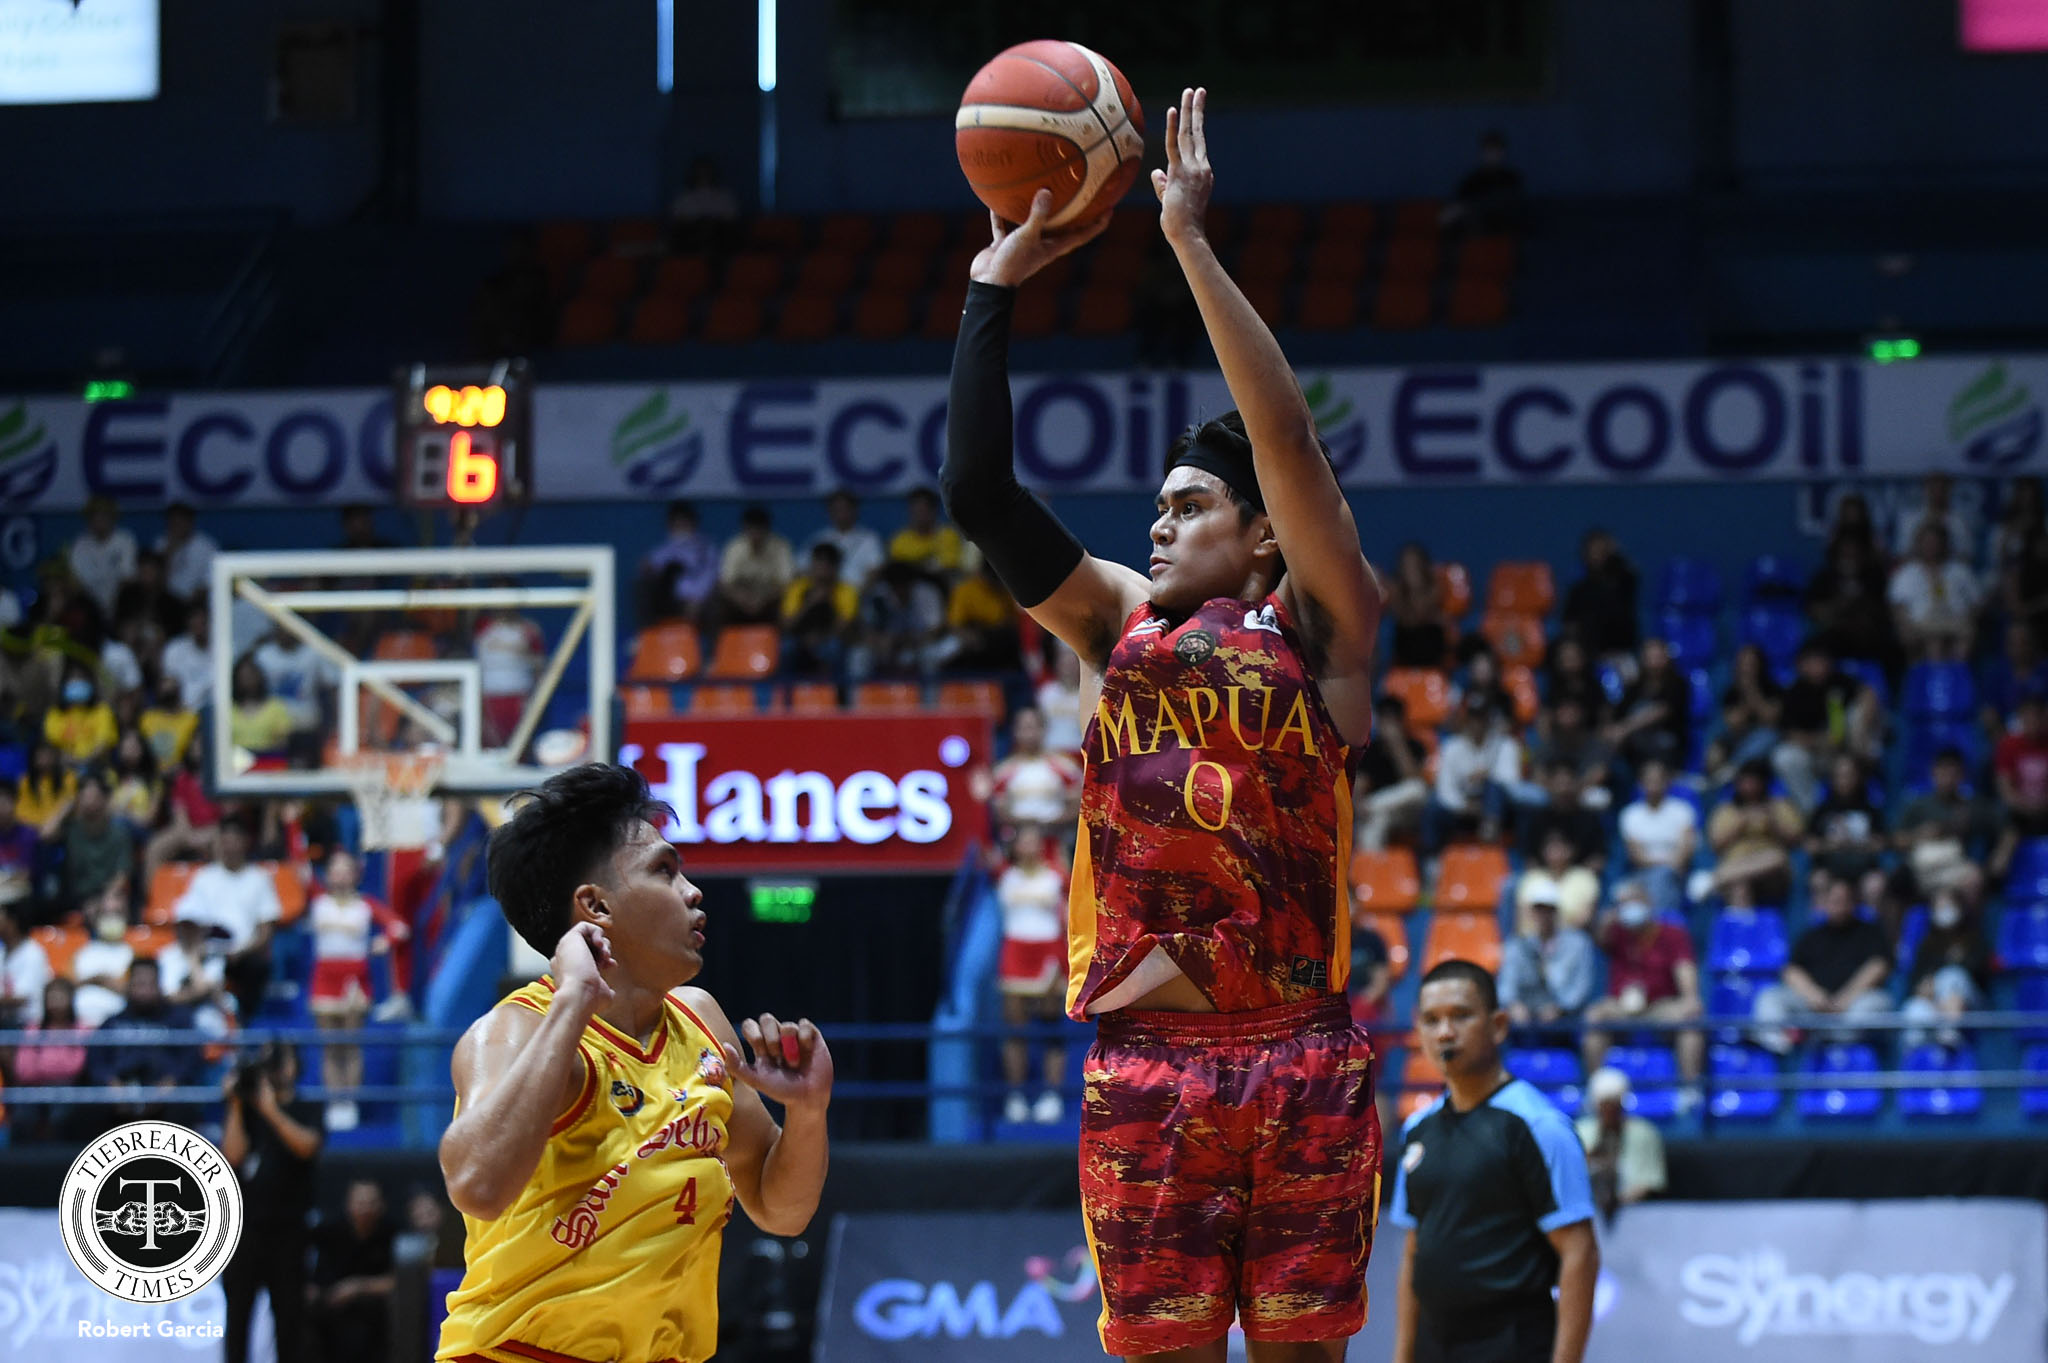 NCAA-99-SSCR-vs.-MU-Clint-Escamis Clint Escamis feels right at home in NCAA Basketball MIT NCAA News  - philippine sports news